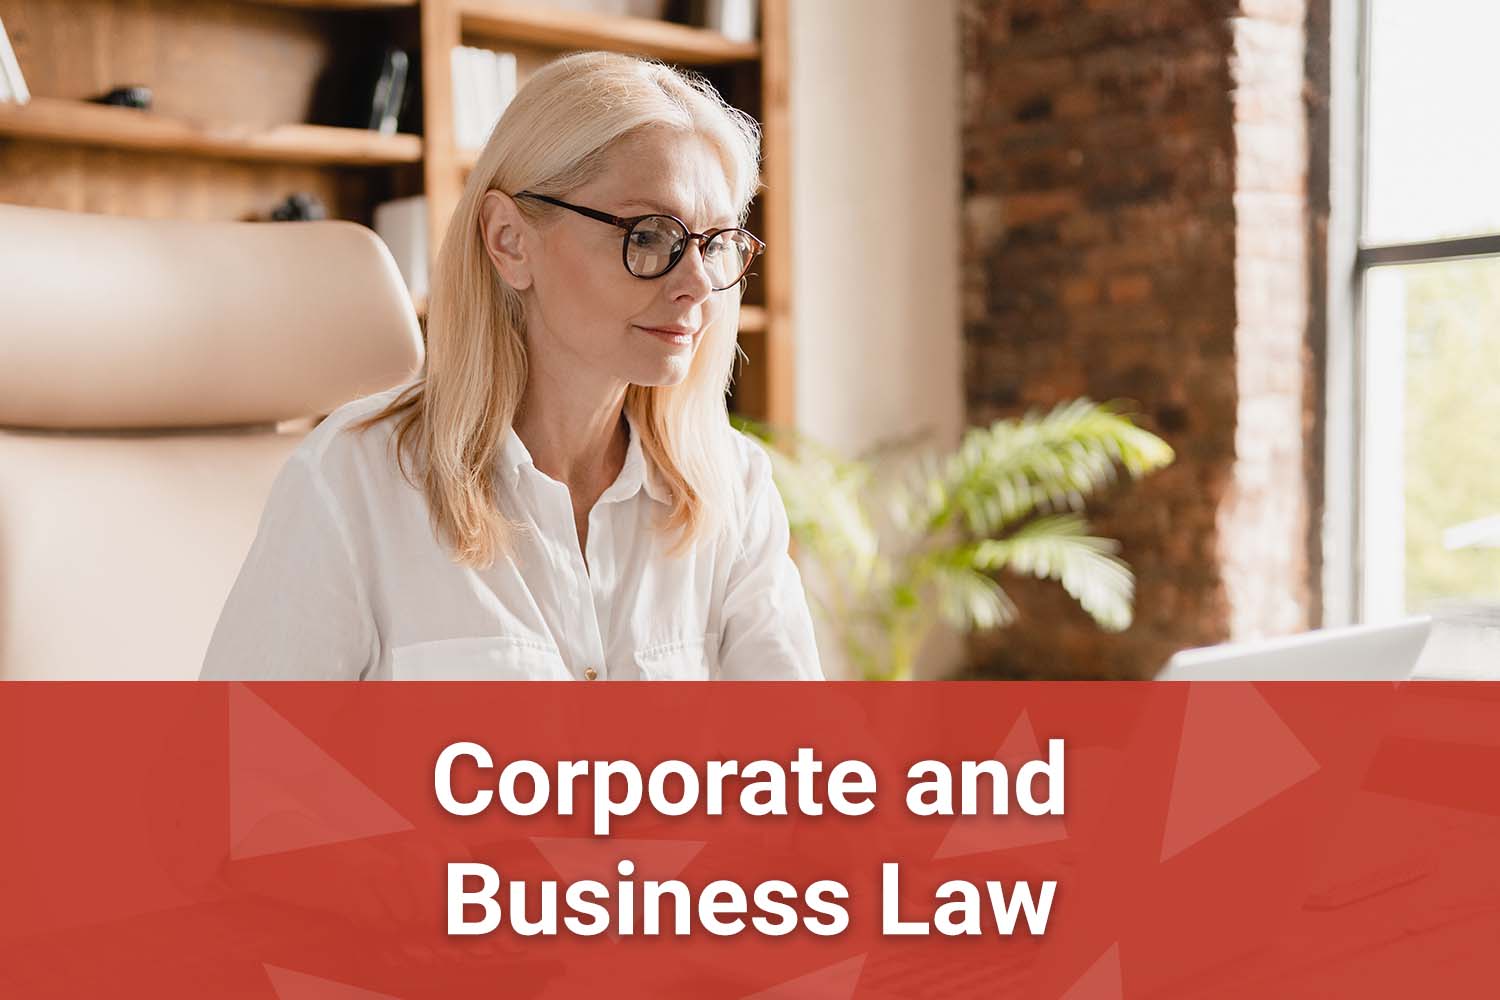 Corporate and Business Law